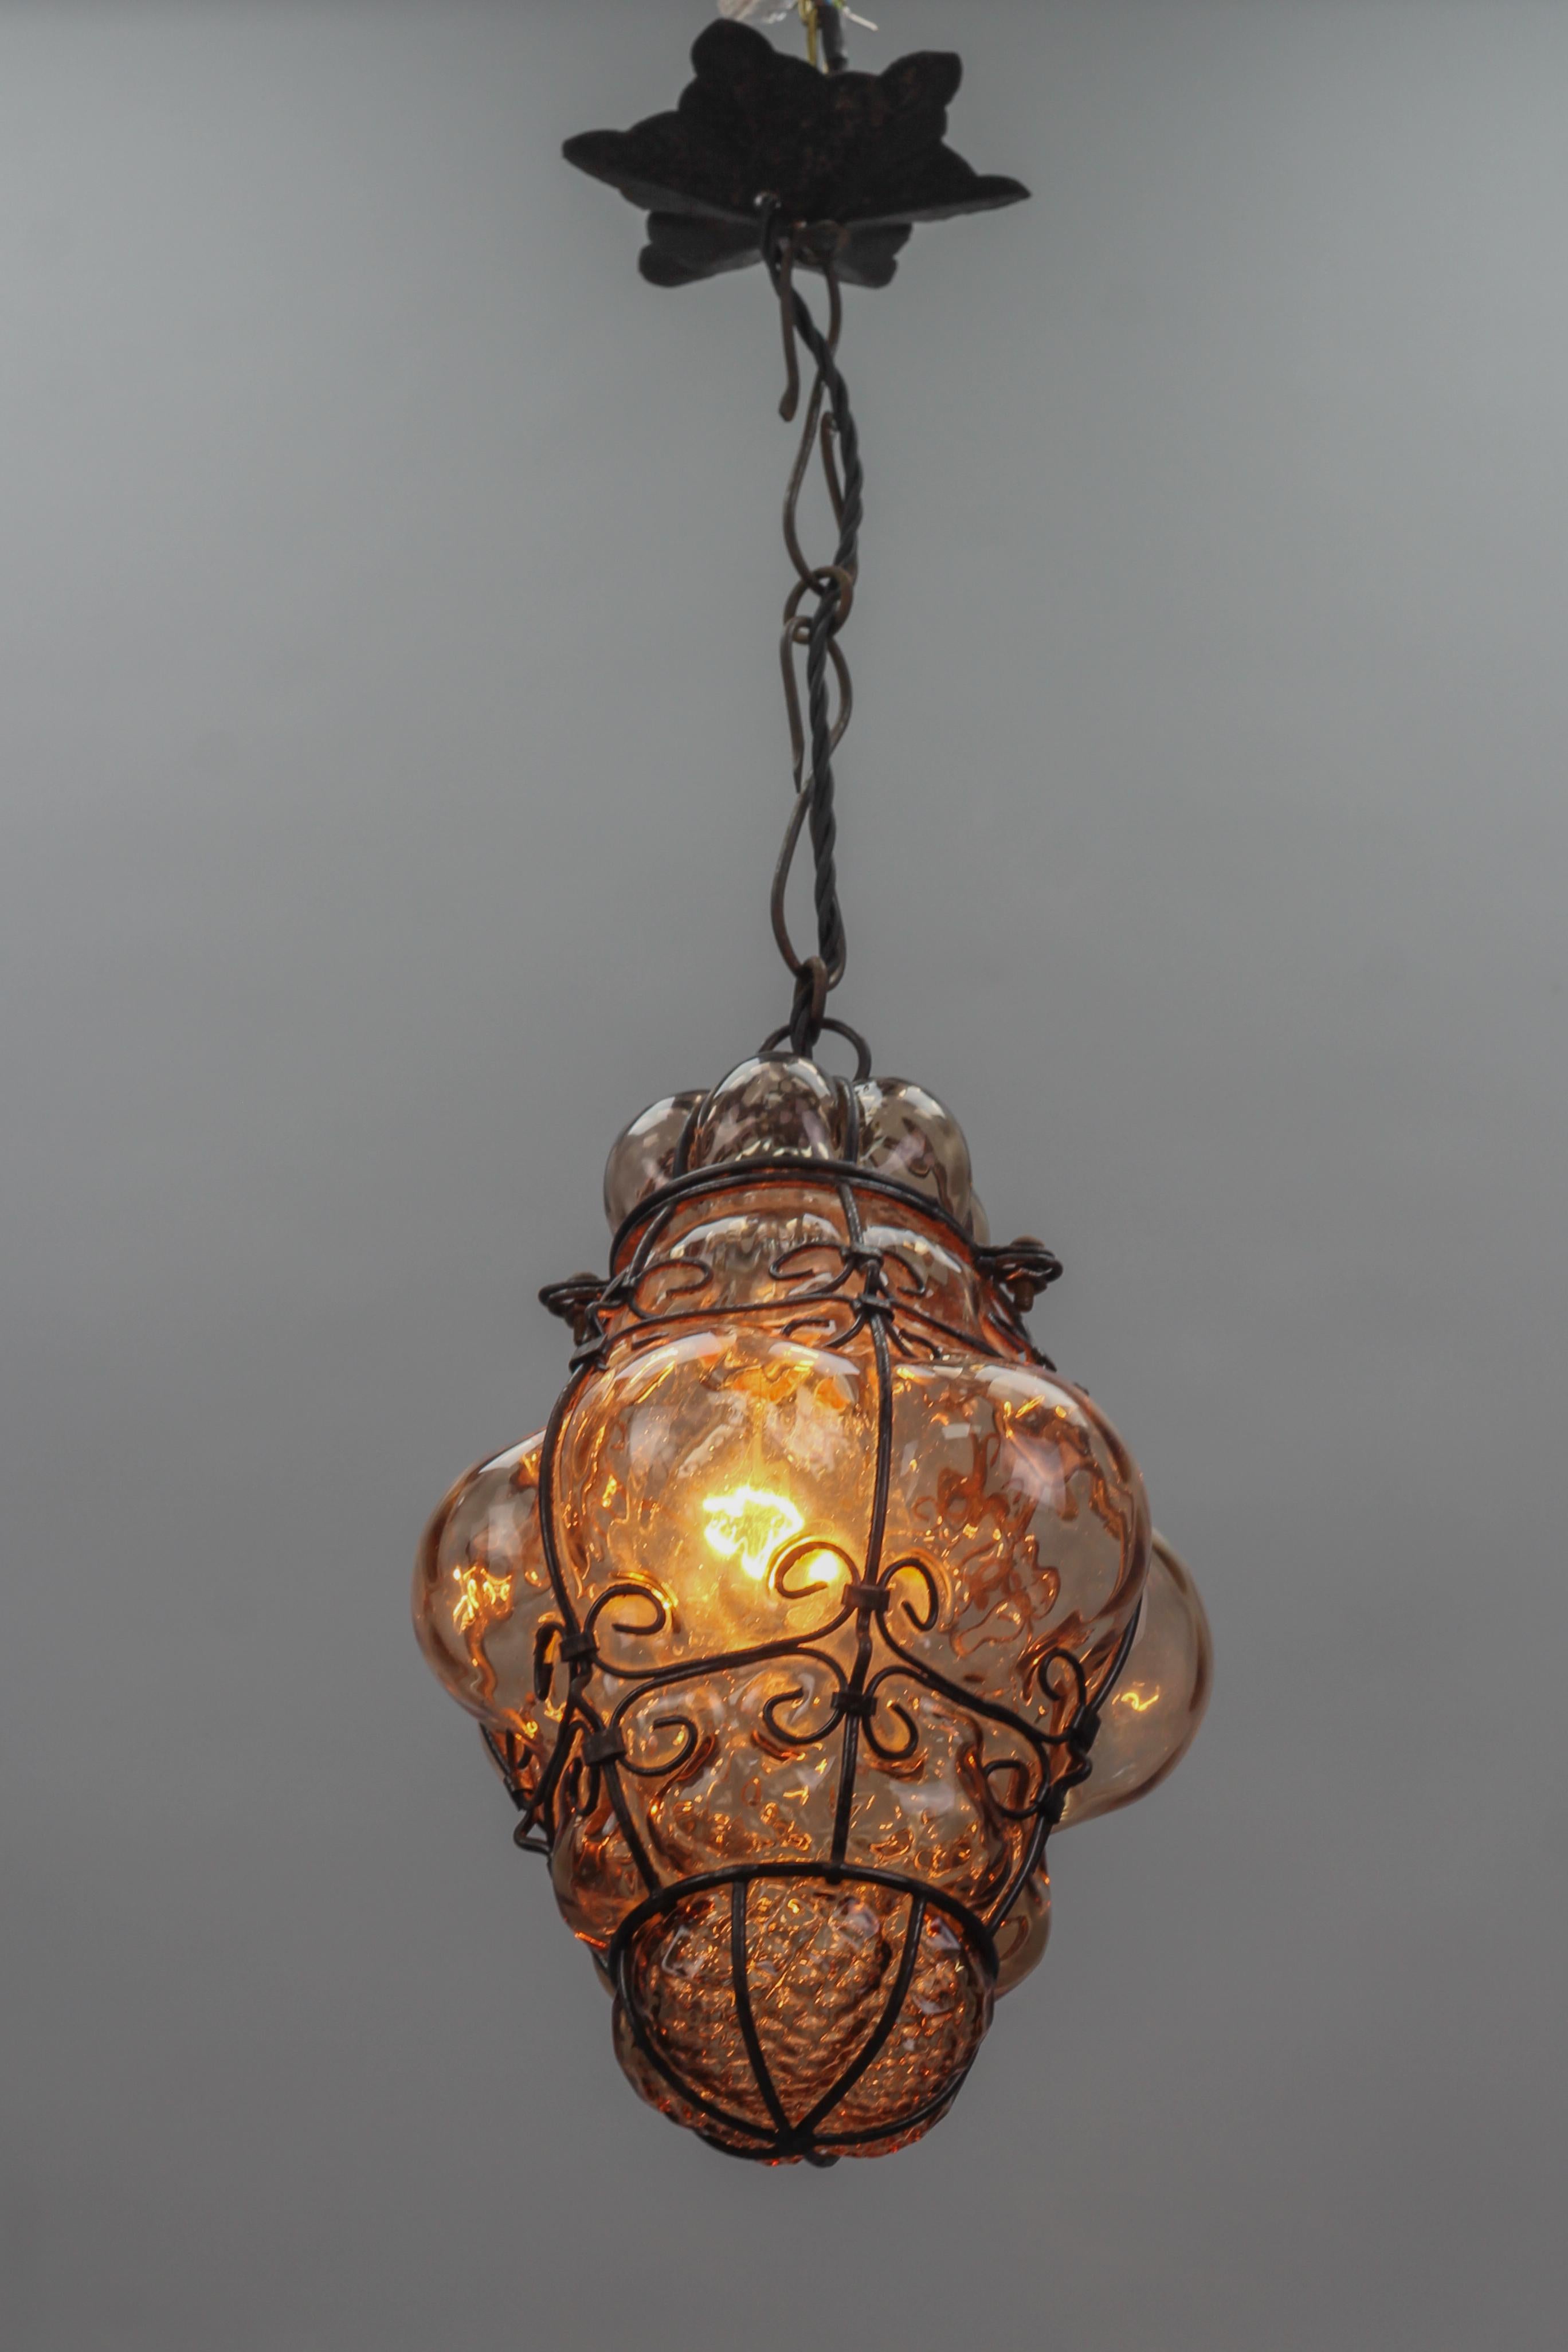 Italian Venetian amber smoke coloured clear murano glass caged lantern.
This beautiful Italian hanging lantern features clear amber smoke-colored Murano glass captivated within a metal frame. The bulbous form is produced when the glass is blown